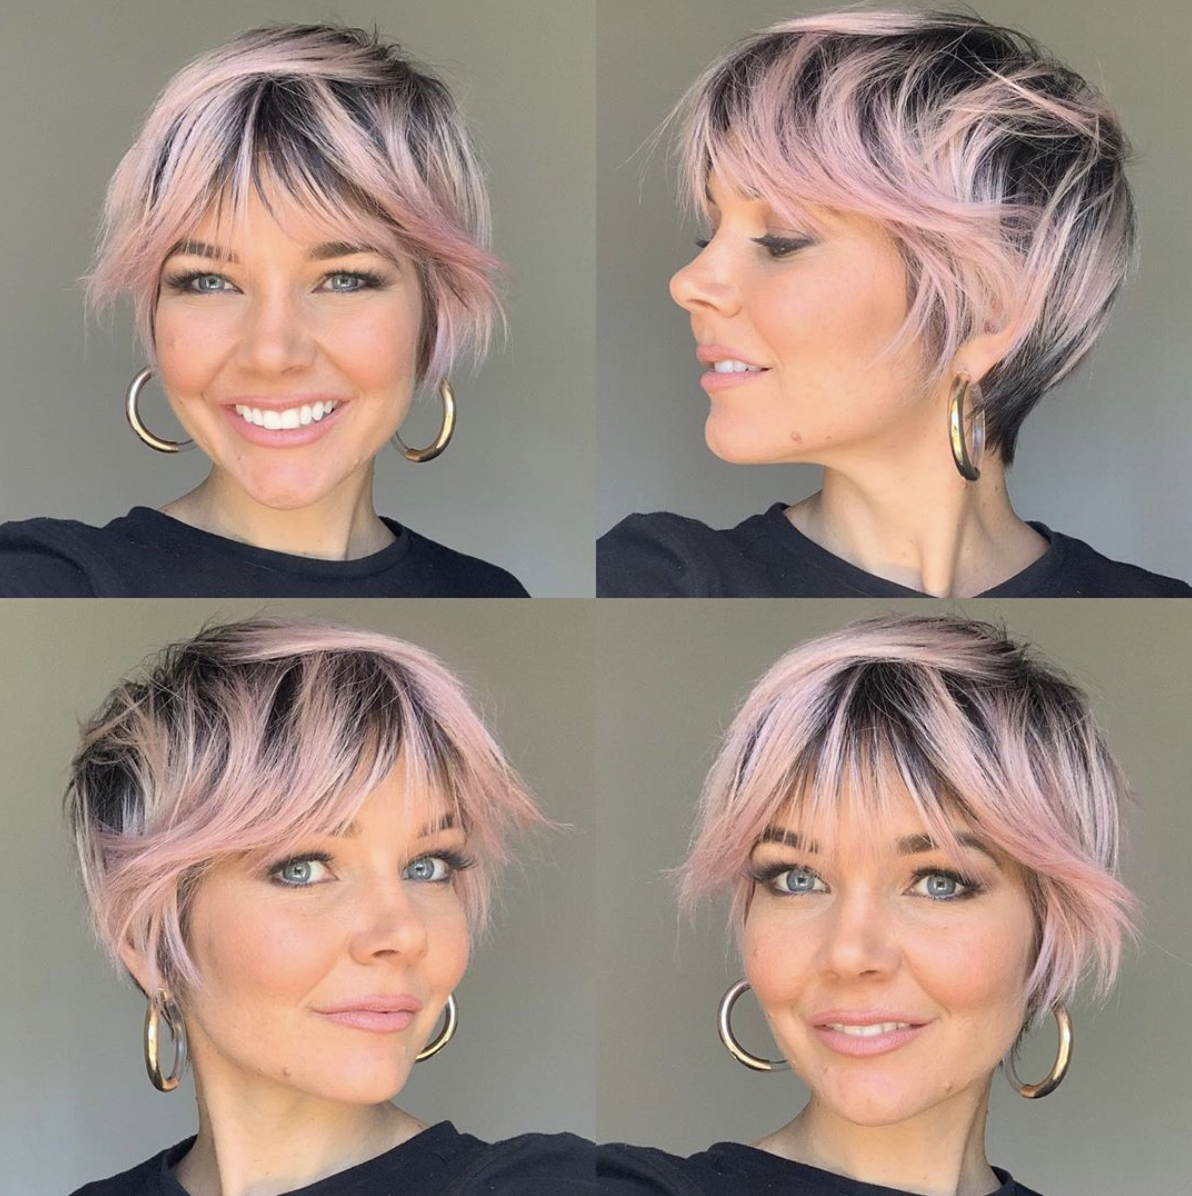 How To Style A Pixie Cut - Behindthechair.com